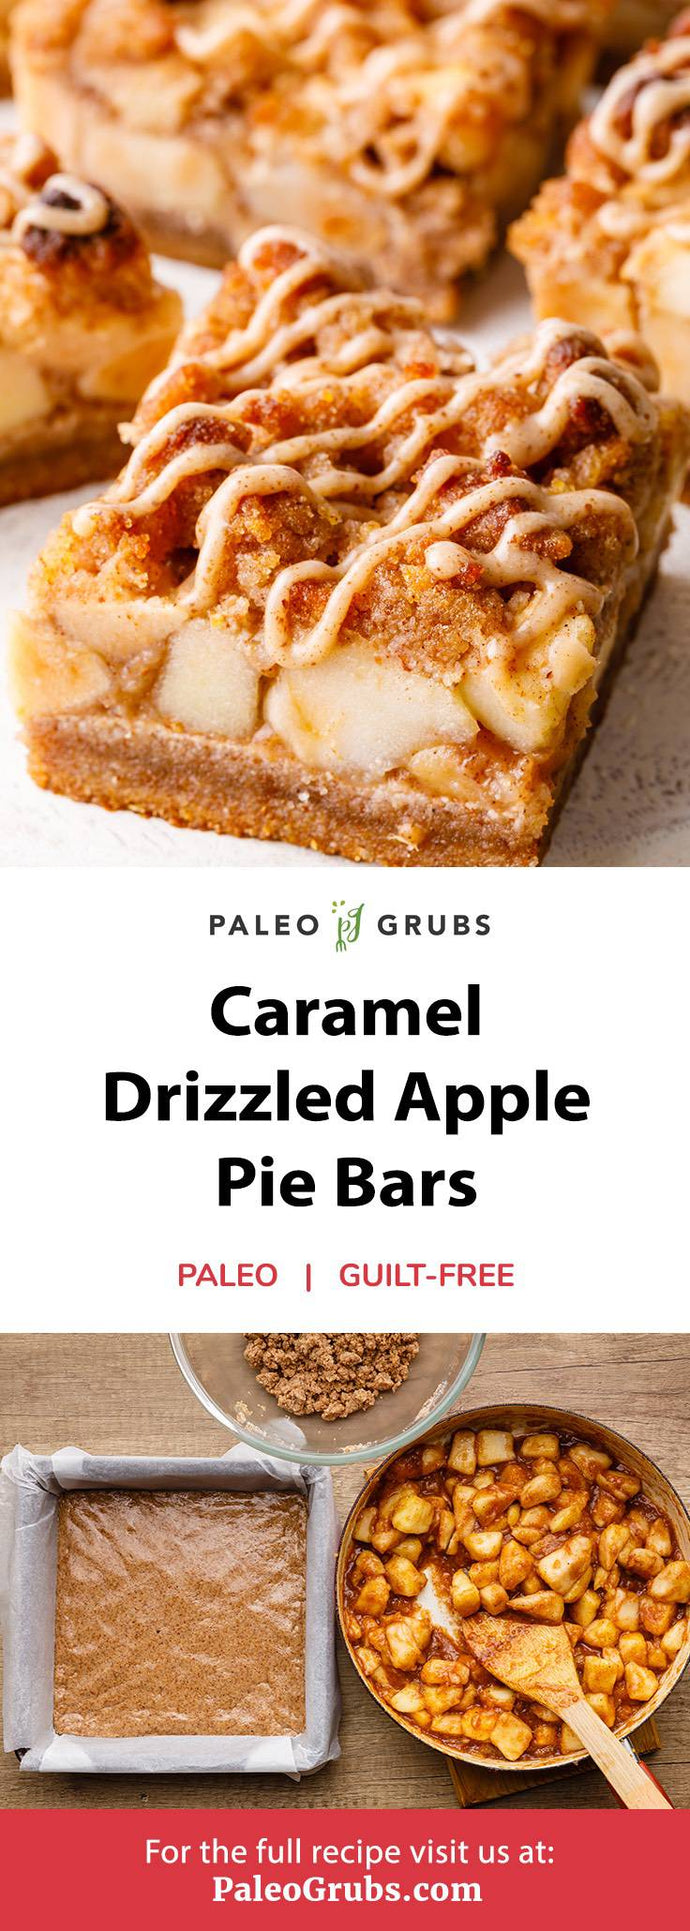 How to Make Caramel Drizzled Apple Pie Bar